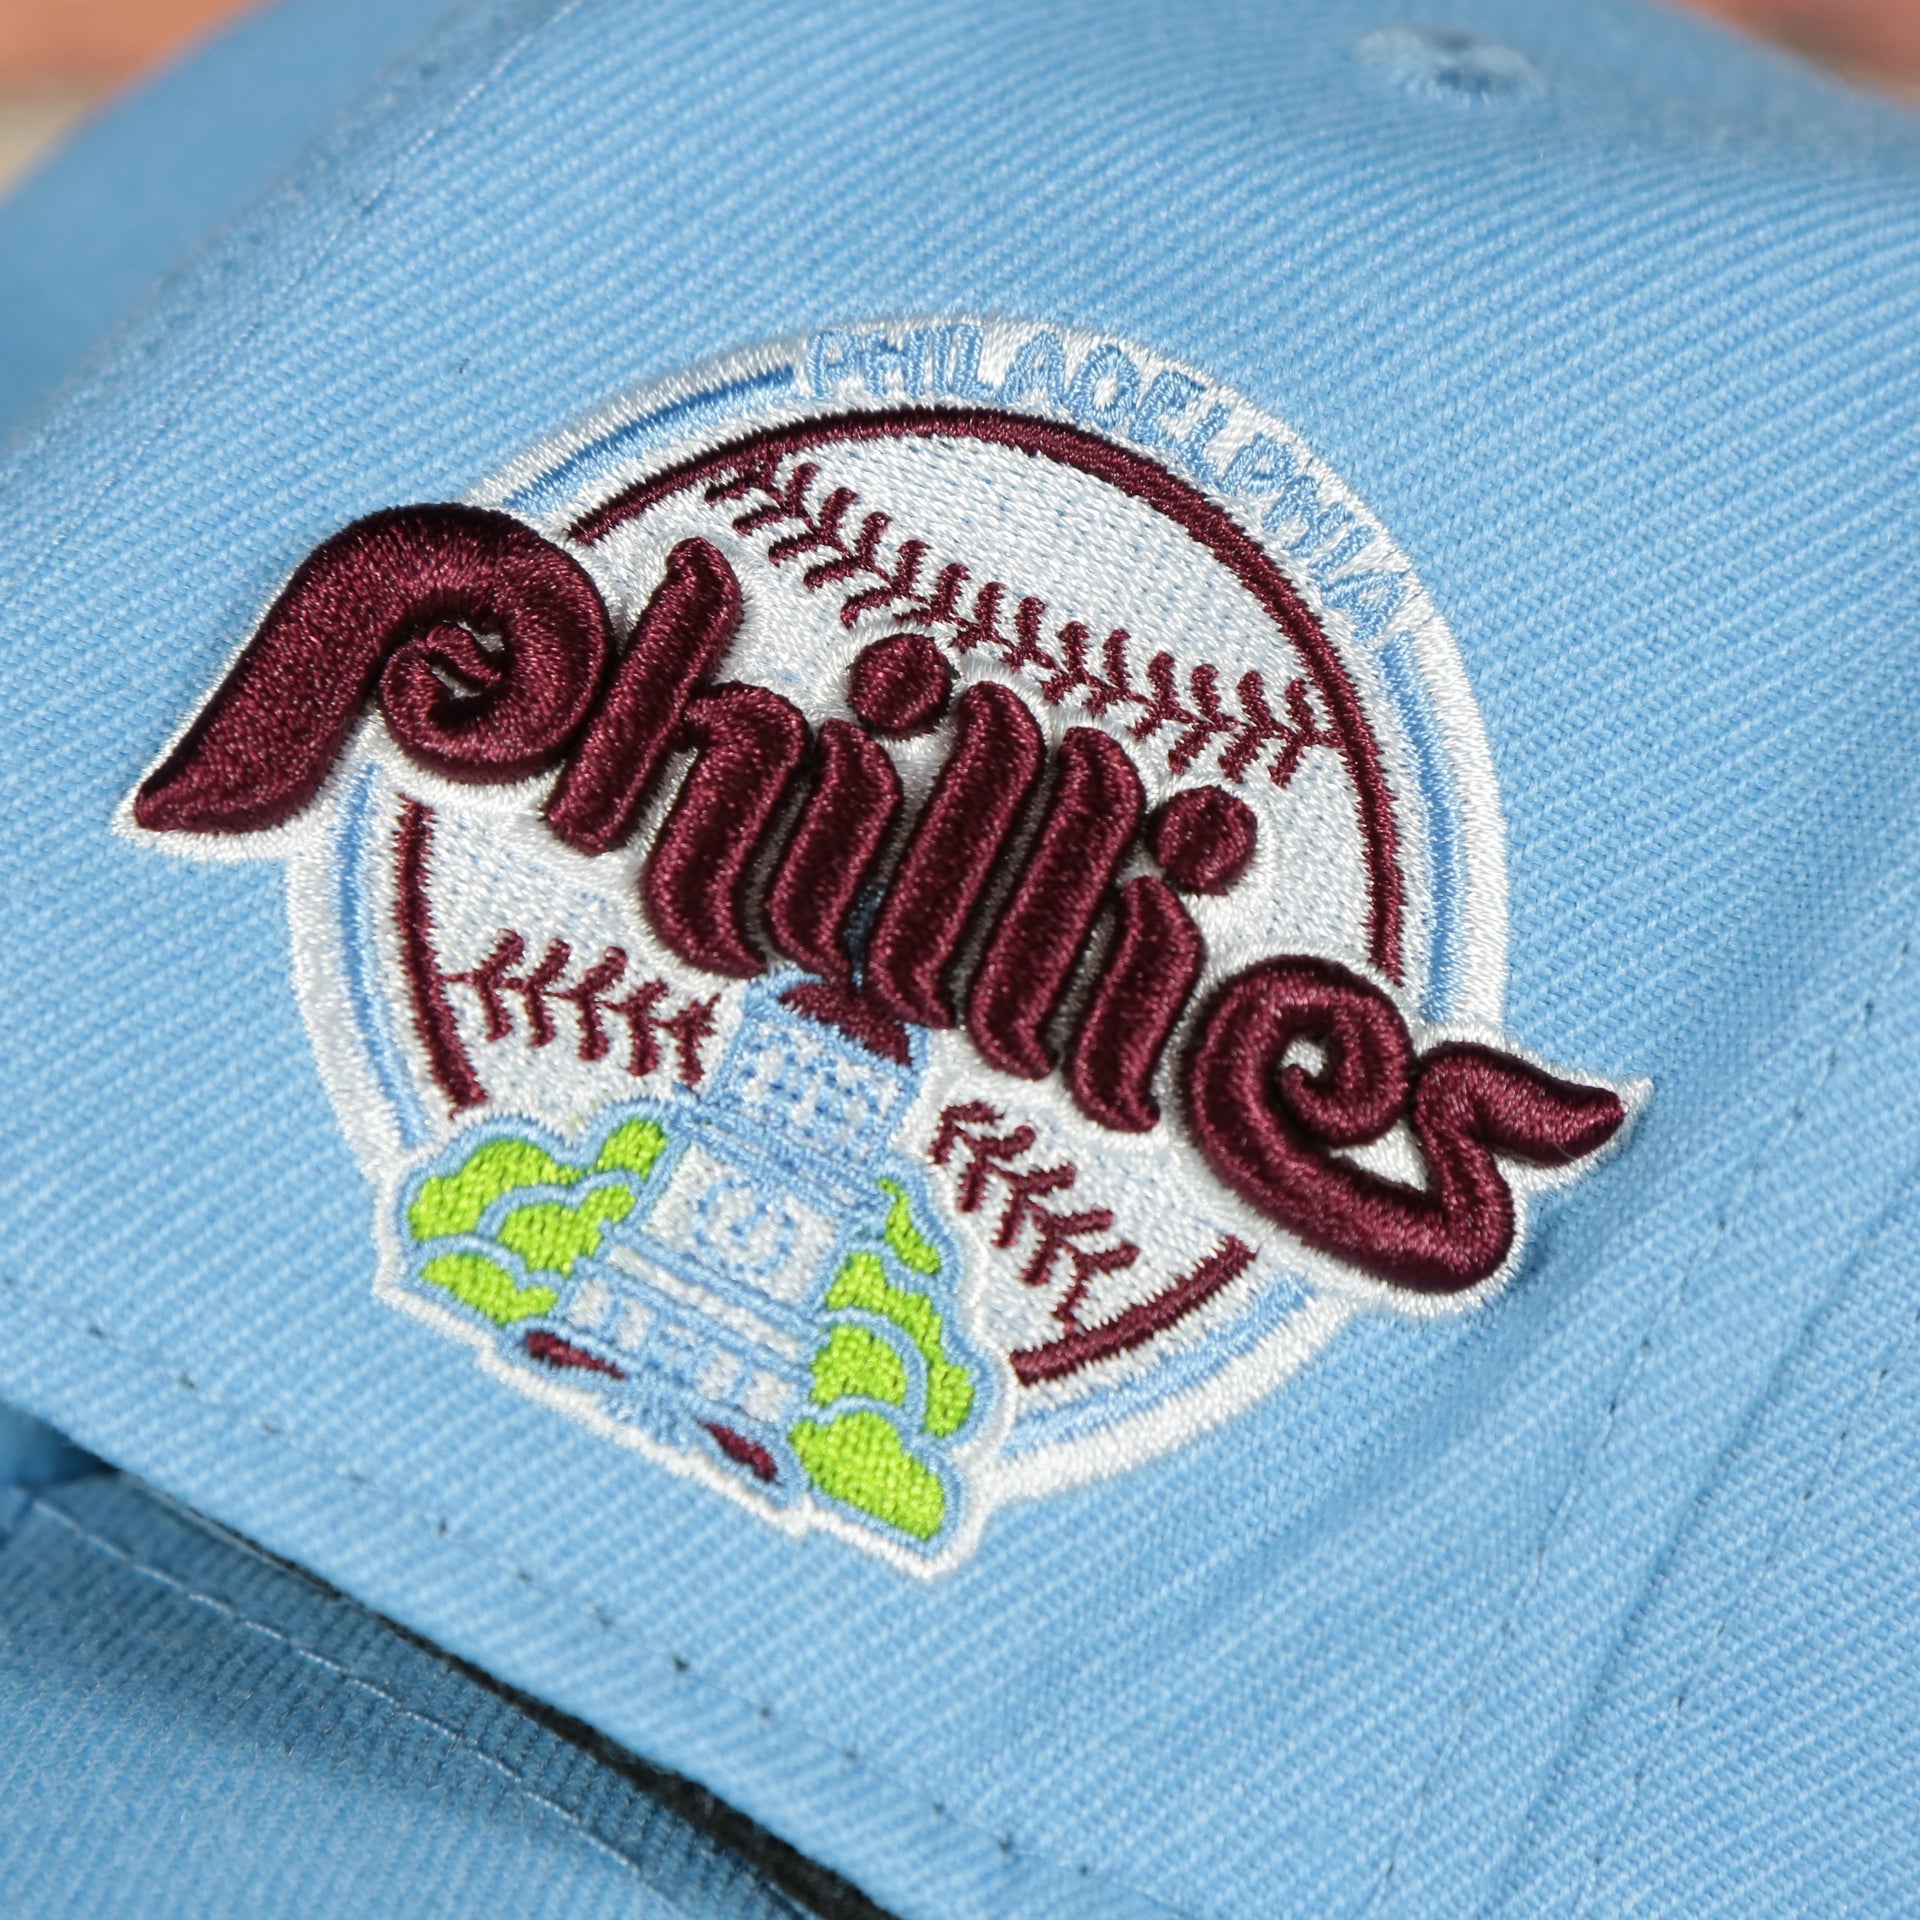 1984 phillies logo on the Philadelphia Phillies Cooperstown 1970 "Phillies" Script 1984 Phillies logo side patch Sky Blue Snapback Hat